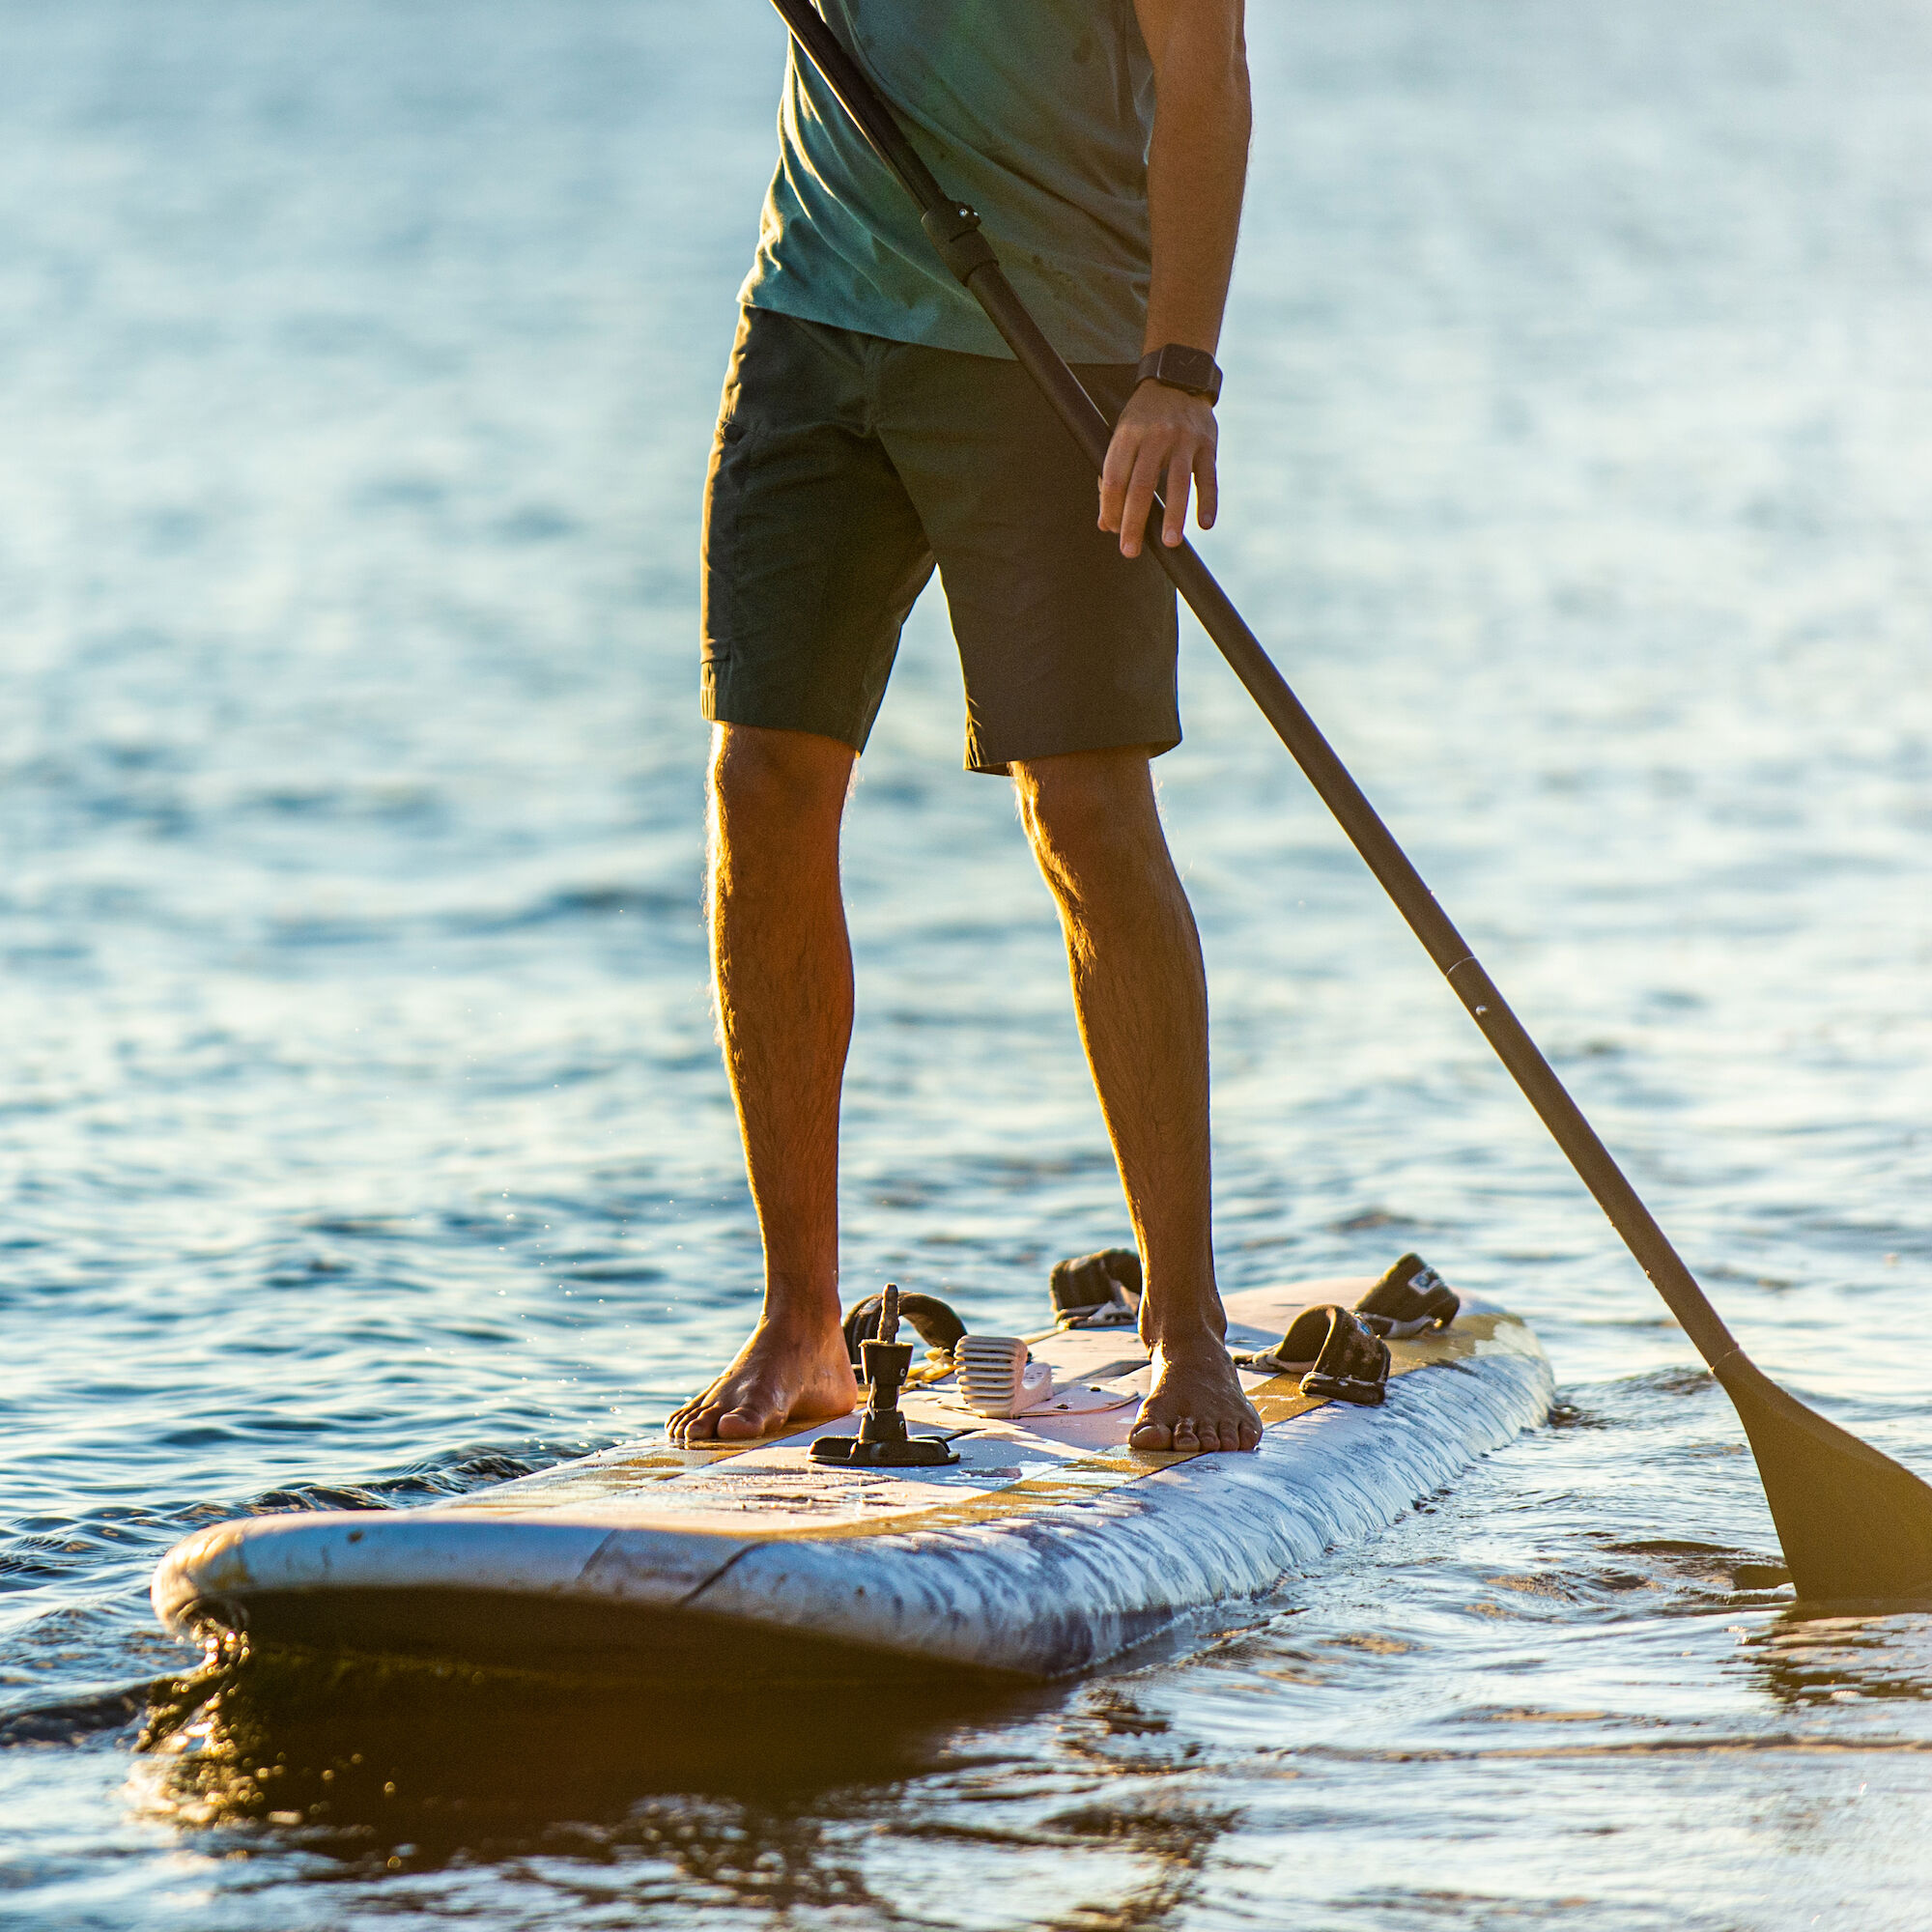 A man paddle boarding on the water.